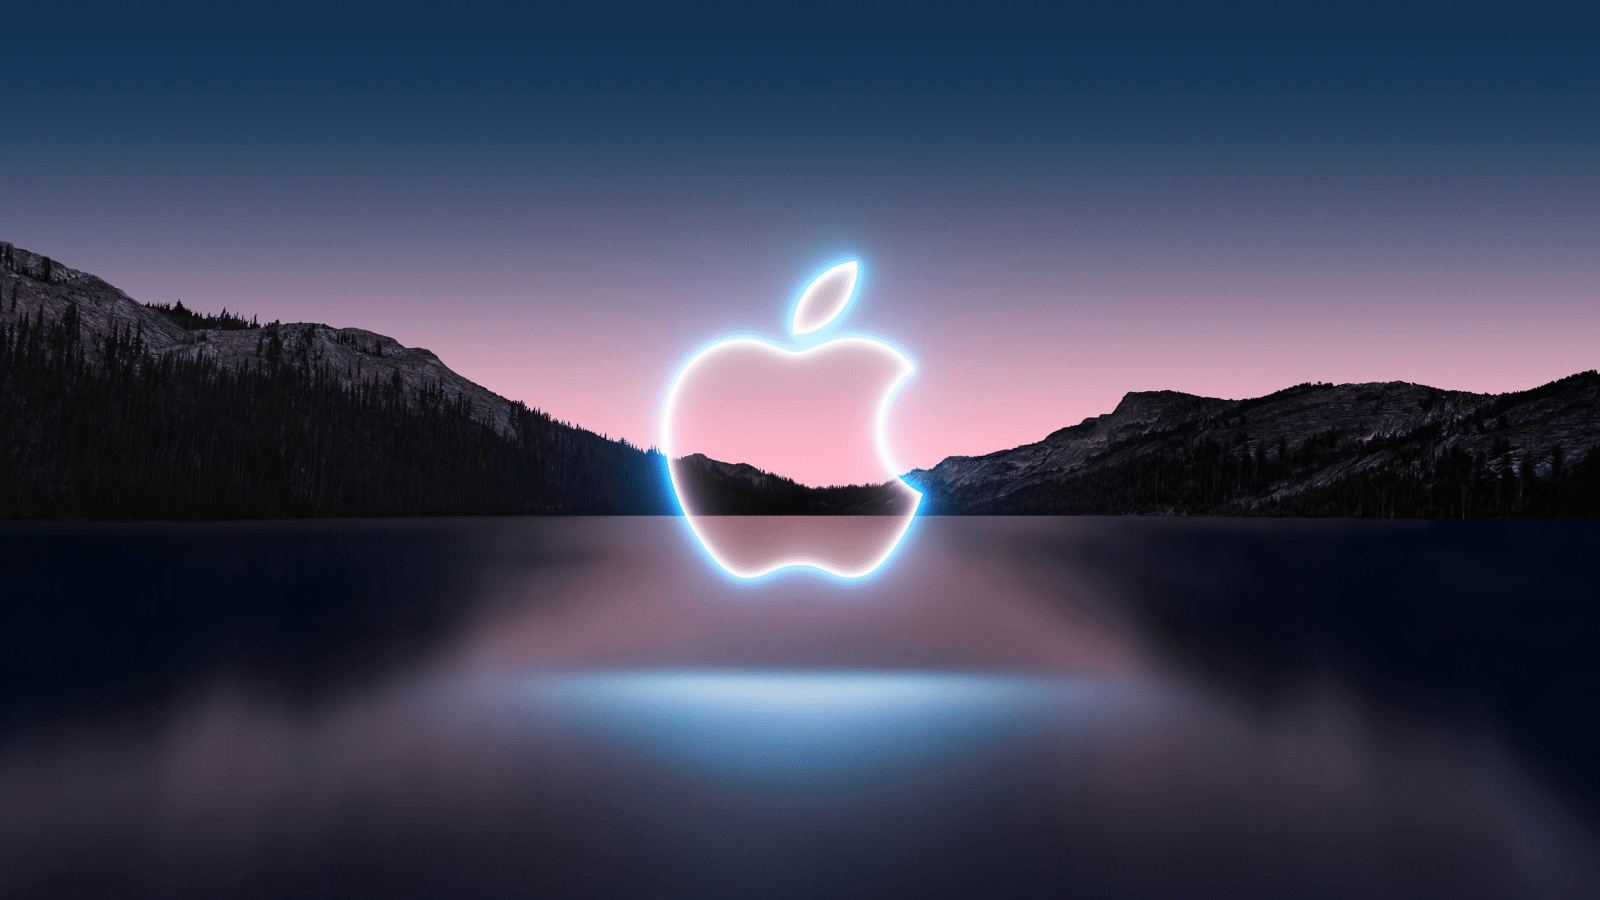 Get California streamin' with these Apple Event themed wallpapers - 9to5Mac